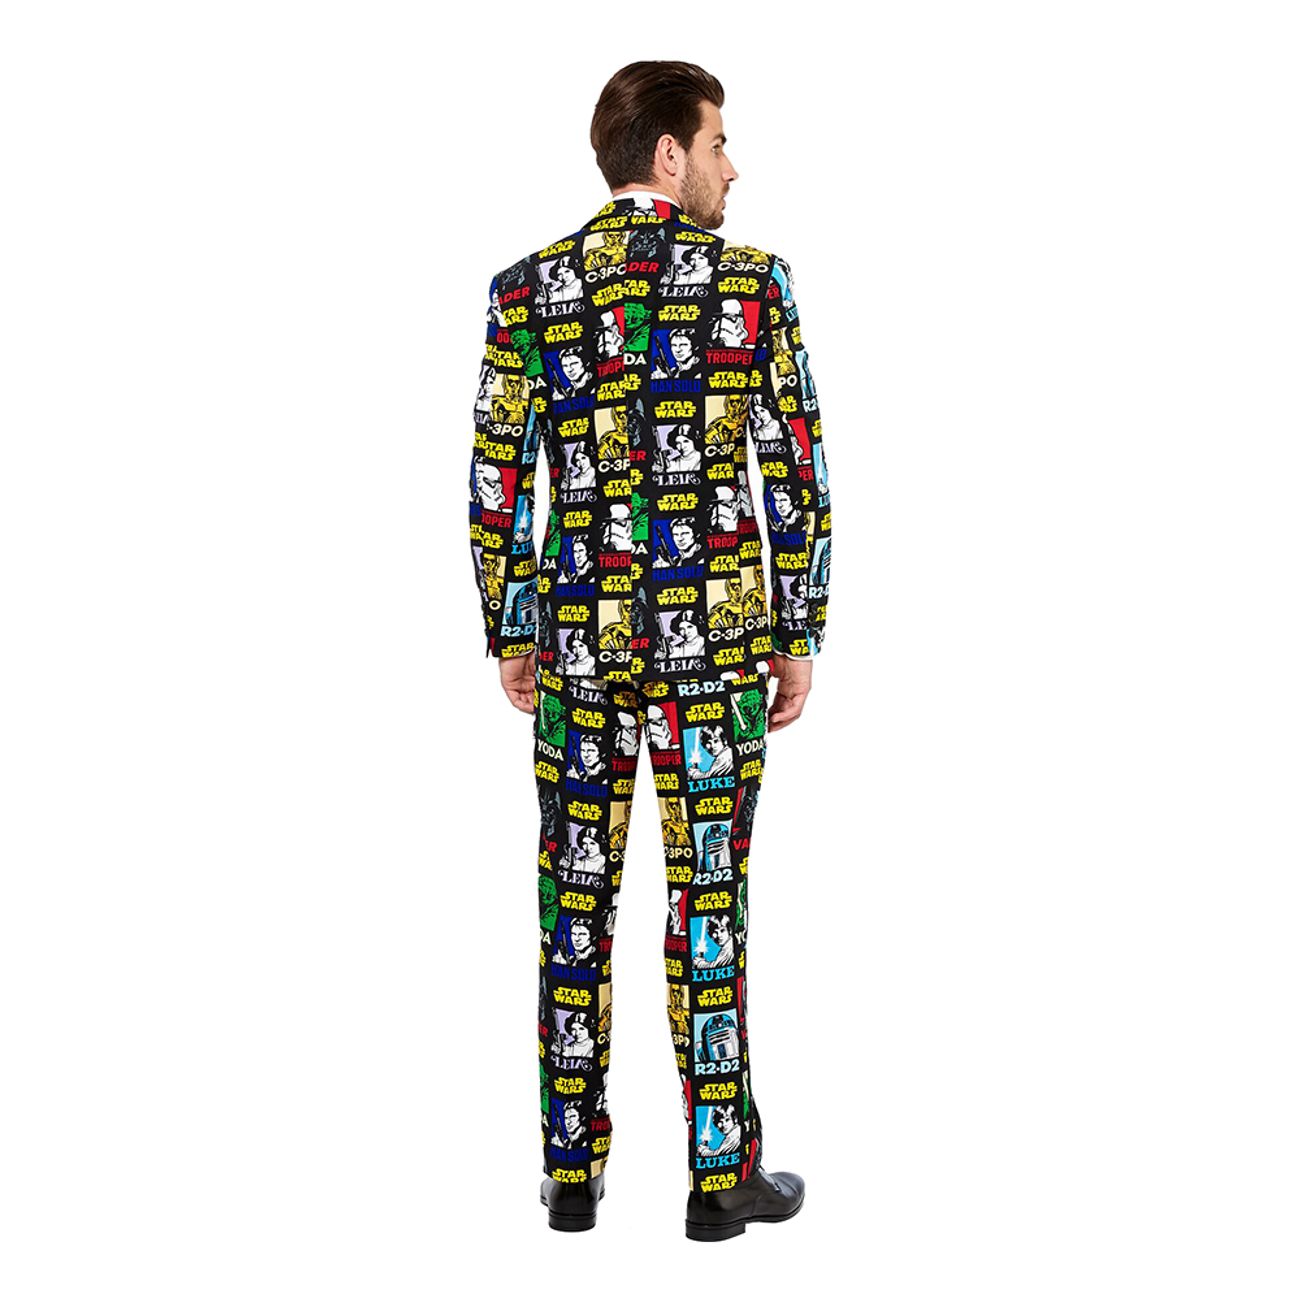 opposuits-strong-force-kostym-5